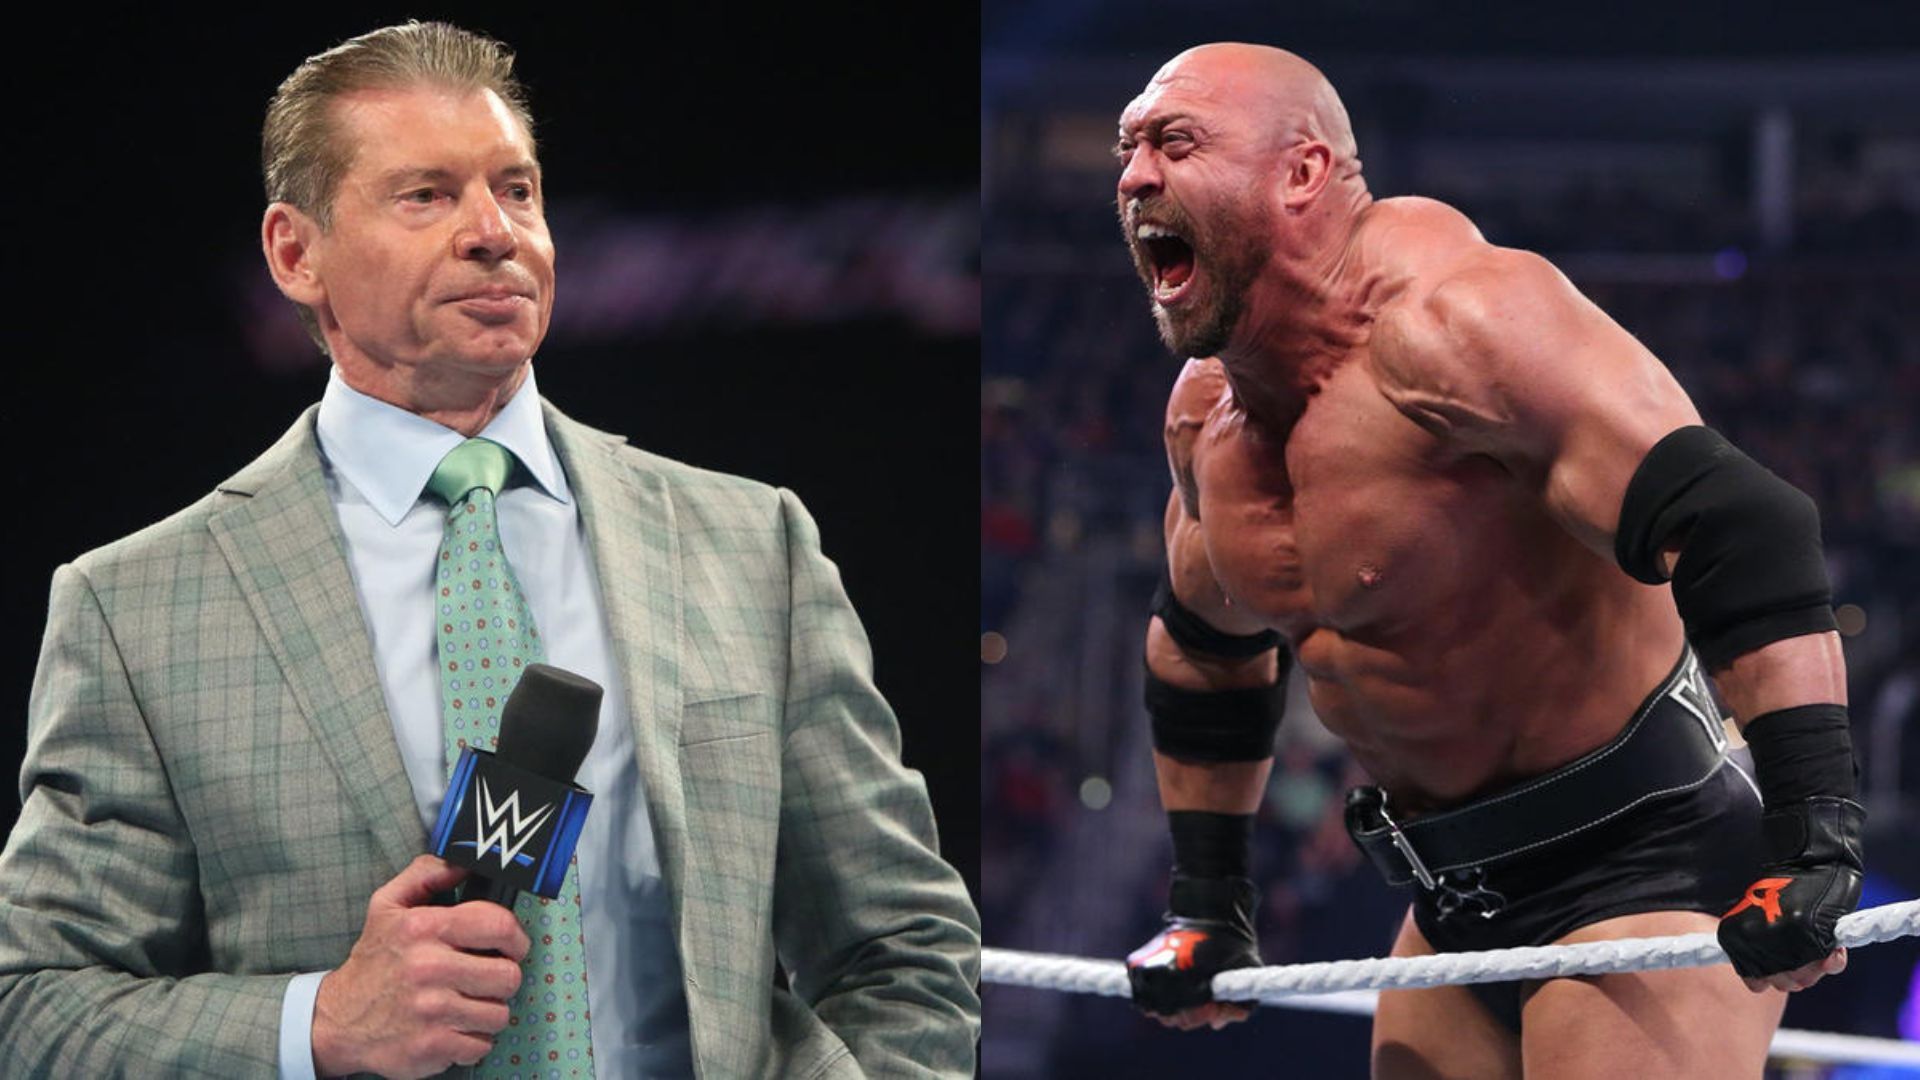 Former WWE Chairman Vince McMahon/ released star Ryback